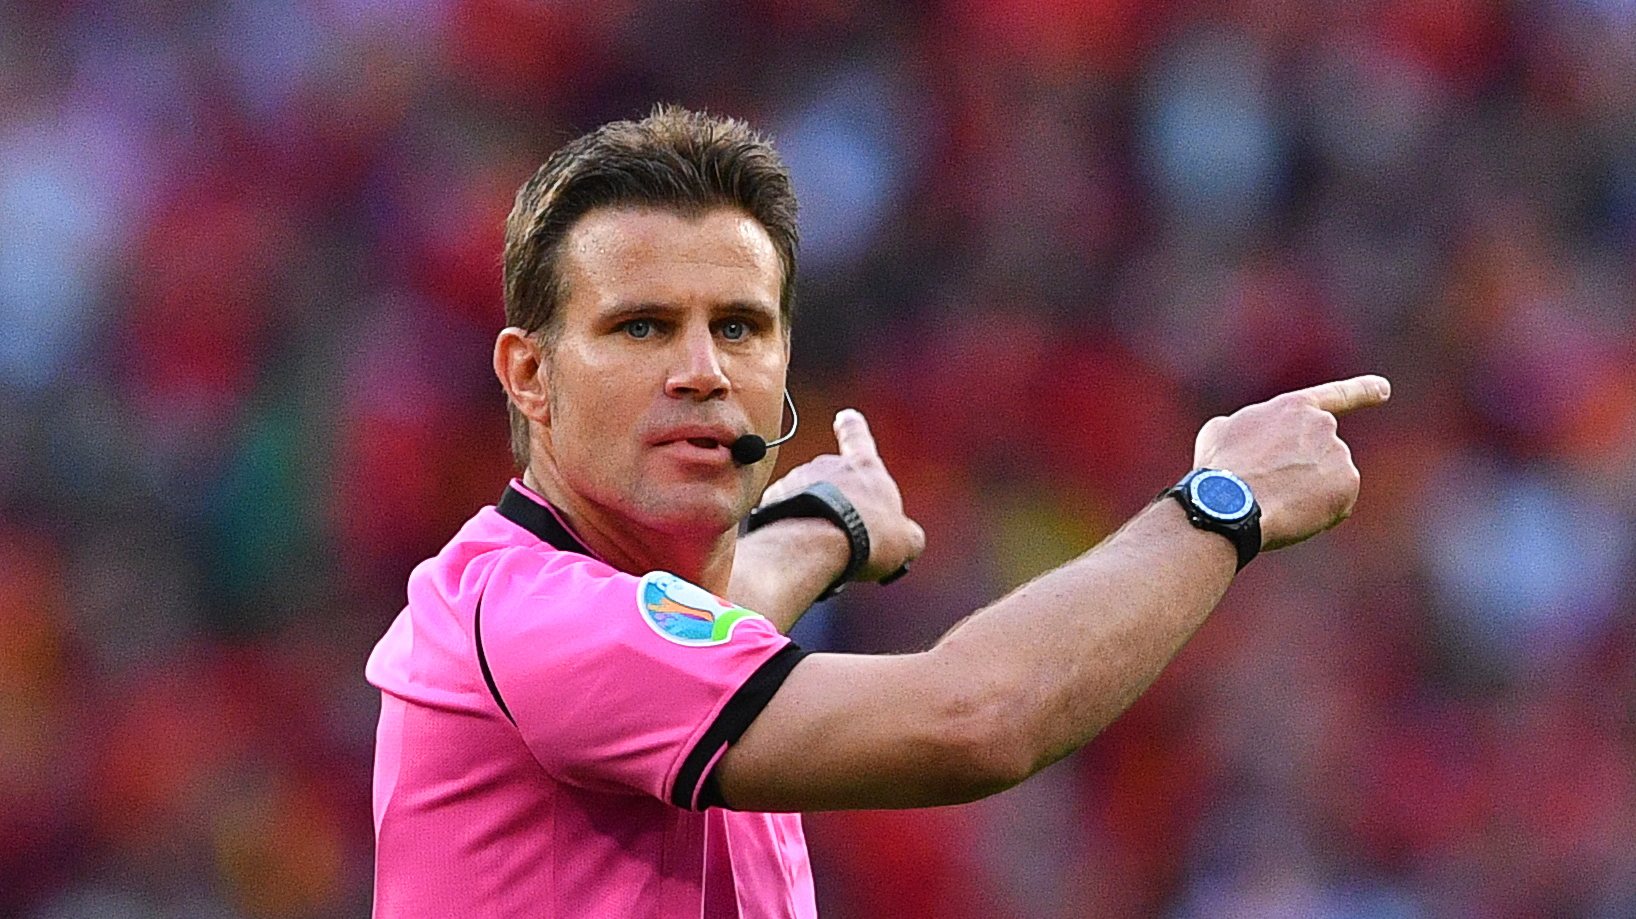 epa09326641 German referee Felix Brych gestures during the UEFA EURO 2020 semi final between Italy and Spain in London, Britain, 06 July 2021.  EPA/Justin Tallis / POOL (RESTRICTIONS: For editorial news reporting purposes only. Images must appear as still images and must not emulate match action video footage. Photographs published in online publications shall have an interval of at least 20 seconds between the posting.)